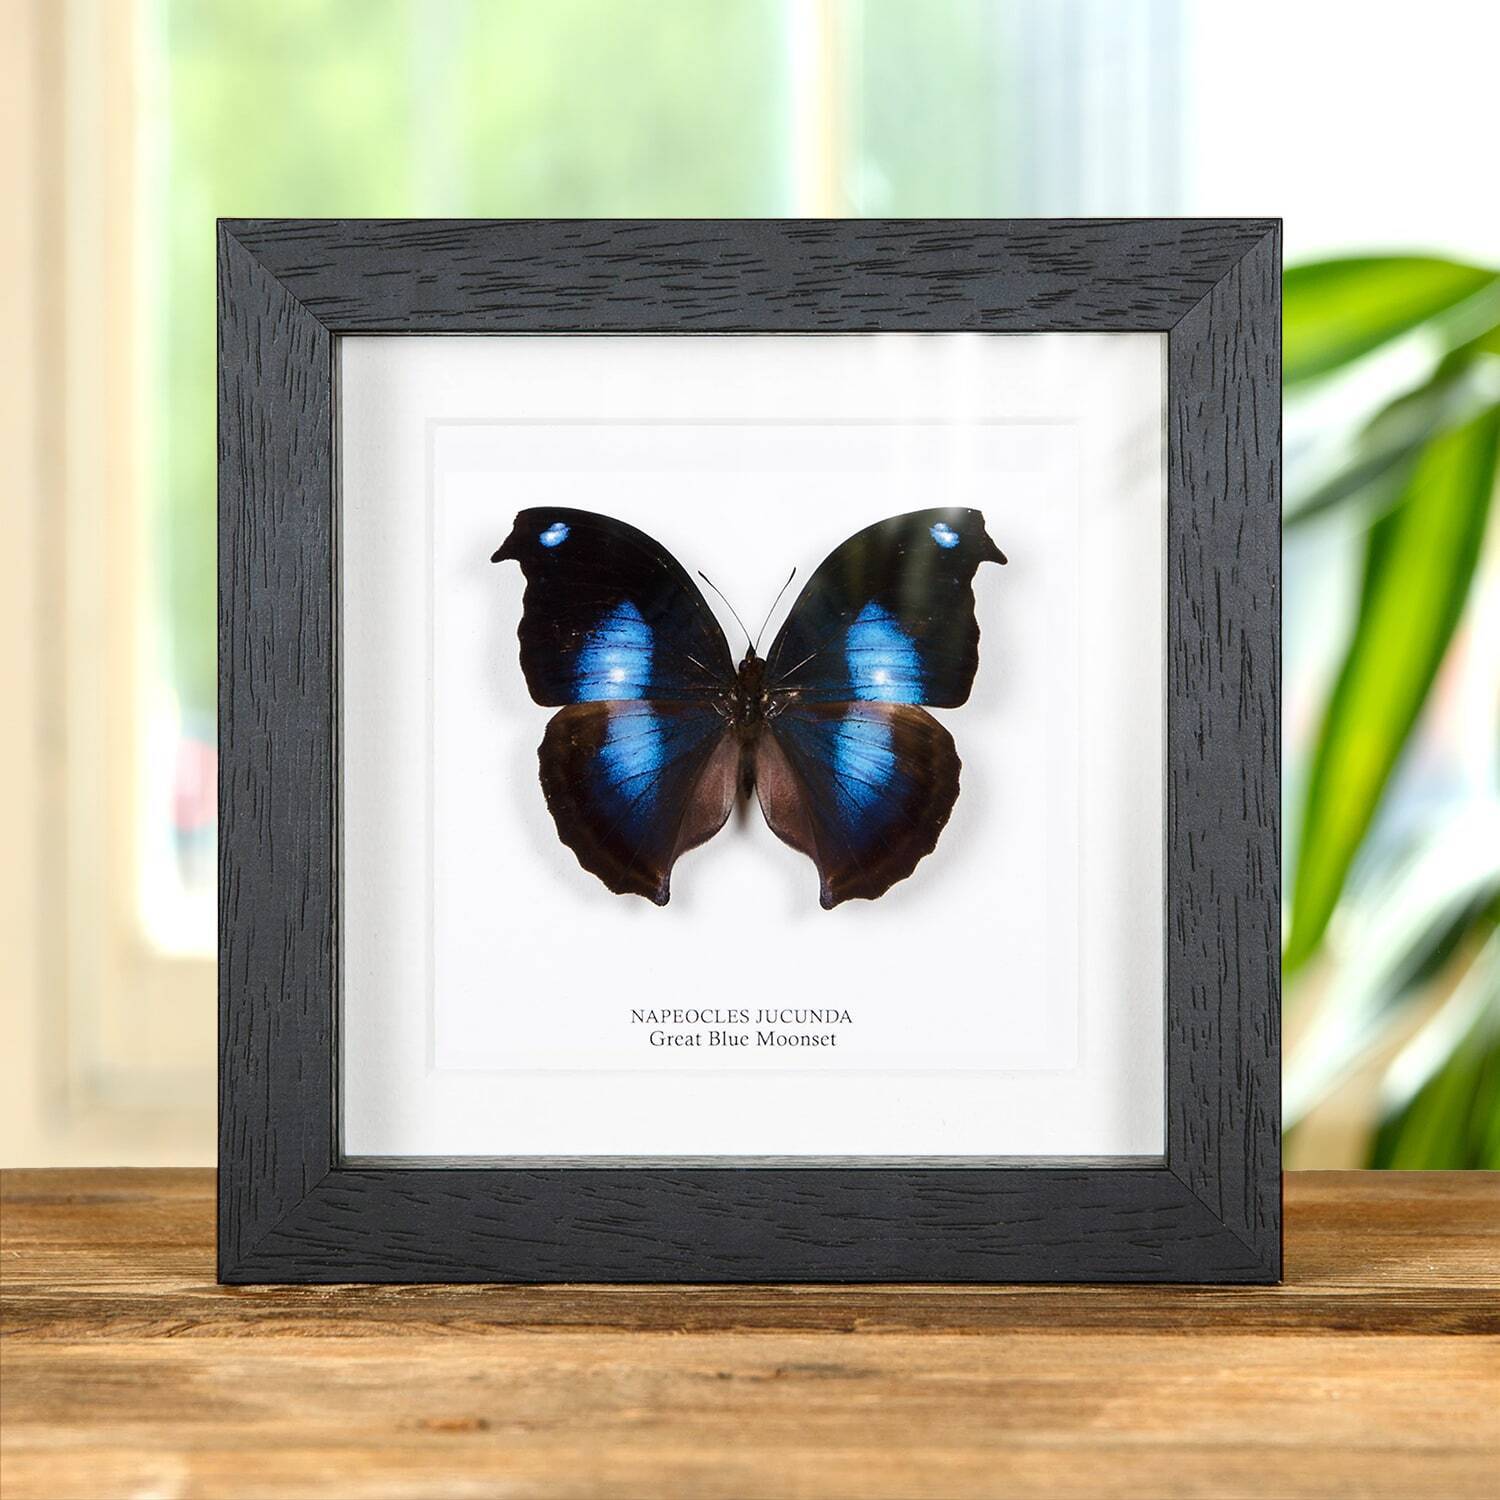 Great Blue Moonset Taxidermy Butterfly Frame (Napeocles jucunda)